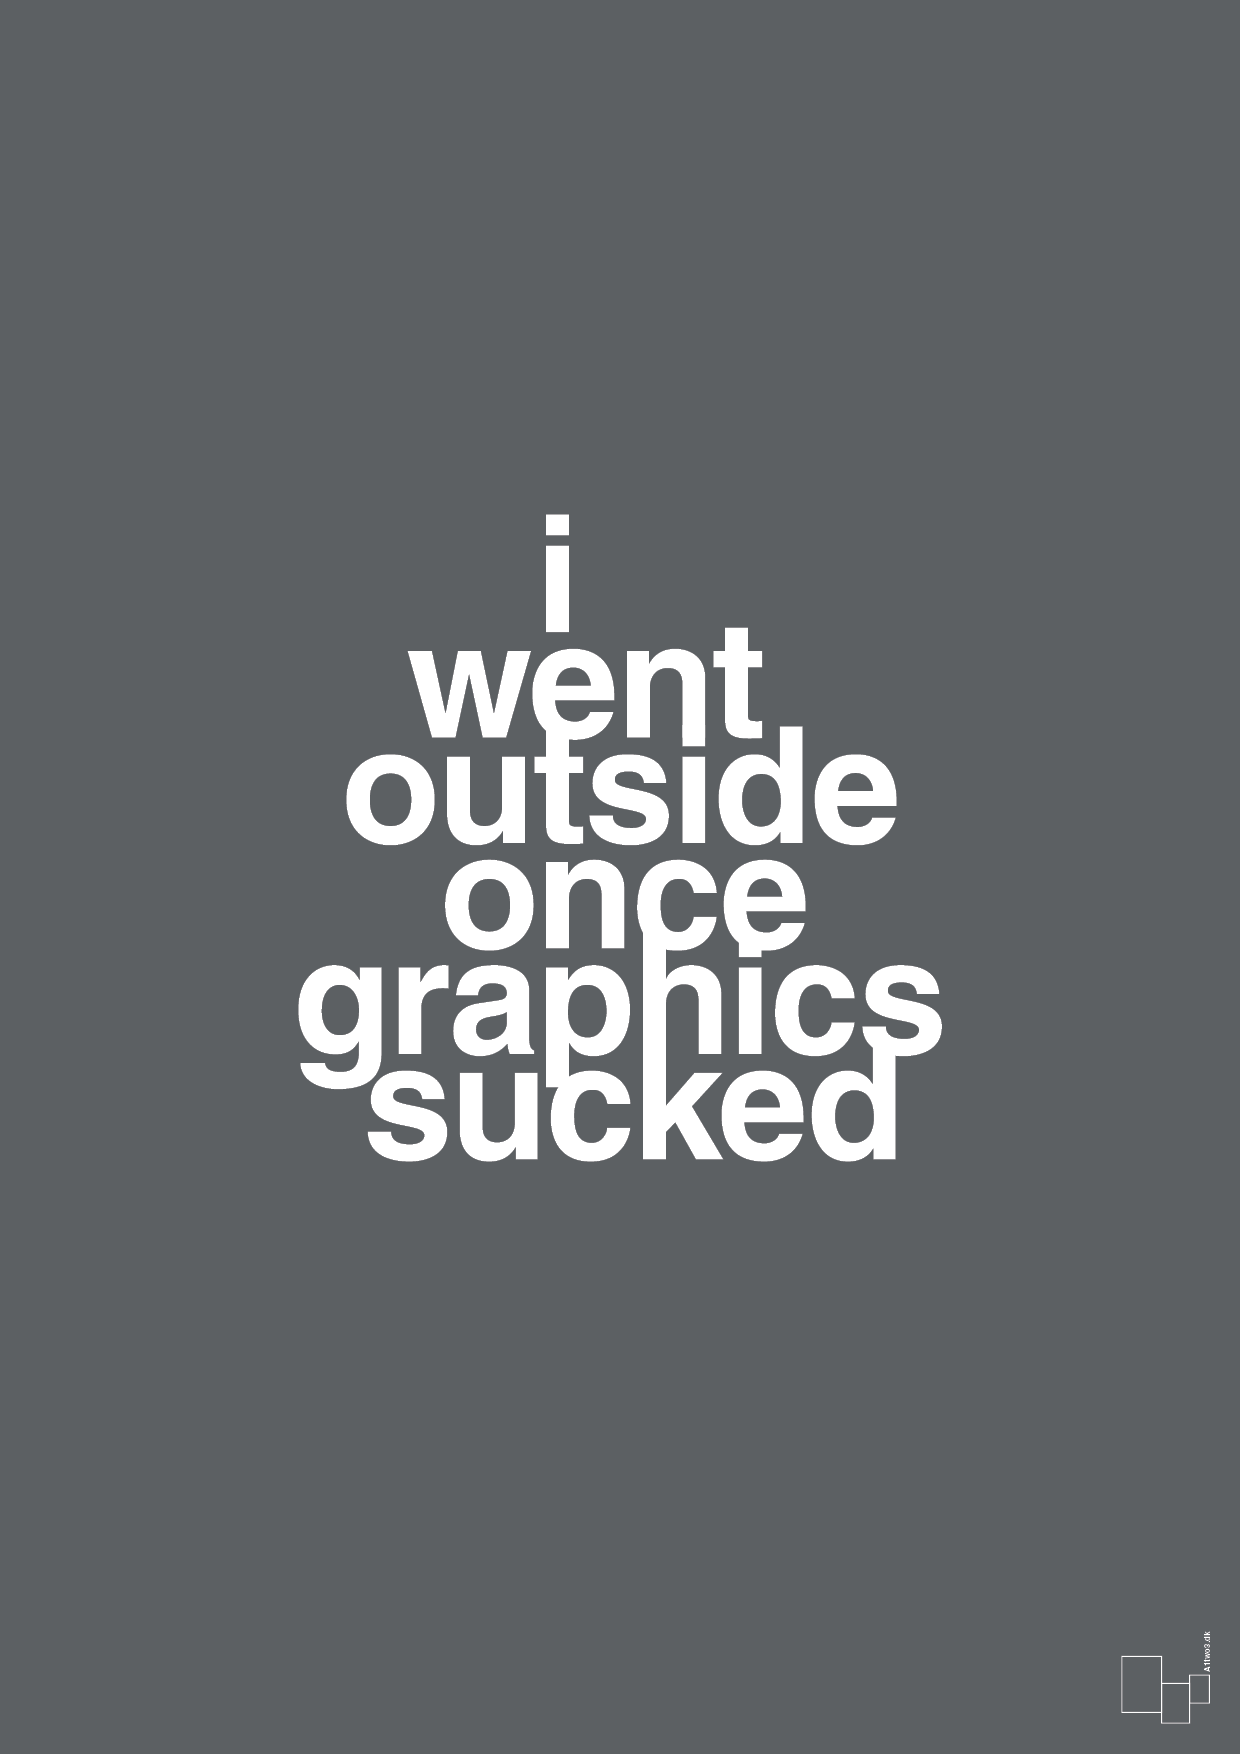 i went outside once graphics sucked - Plakat med Sport & Fritid i Graphic Charcoal